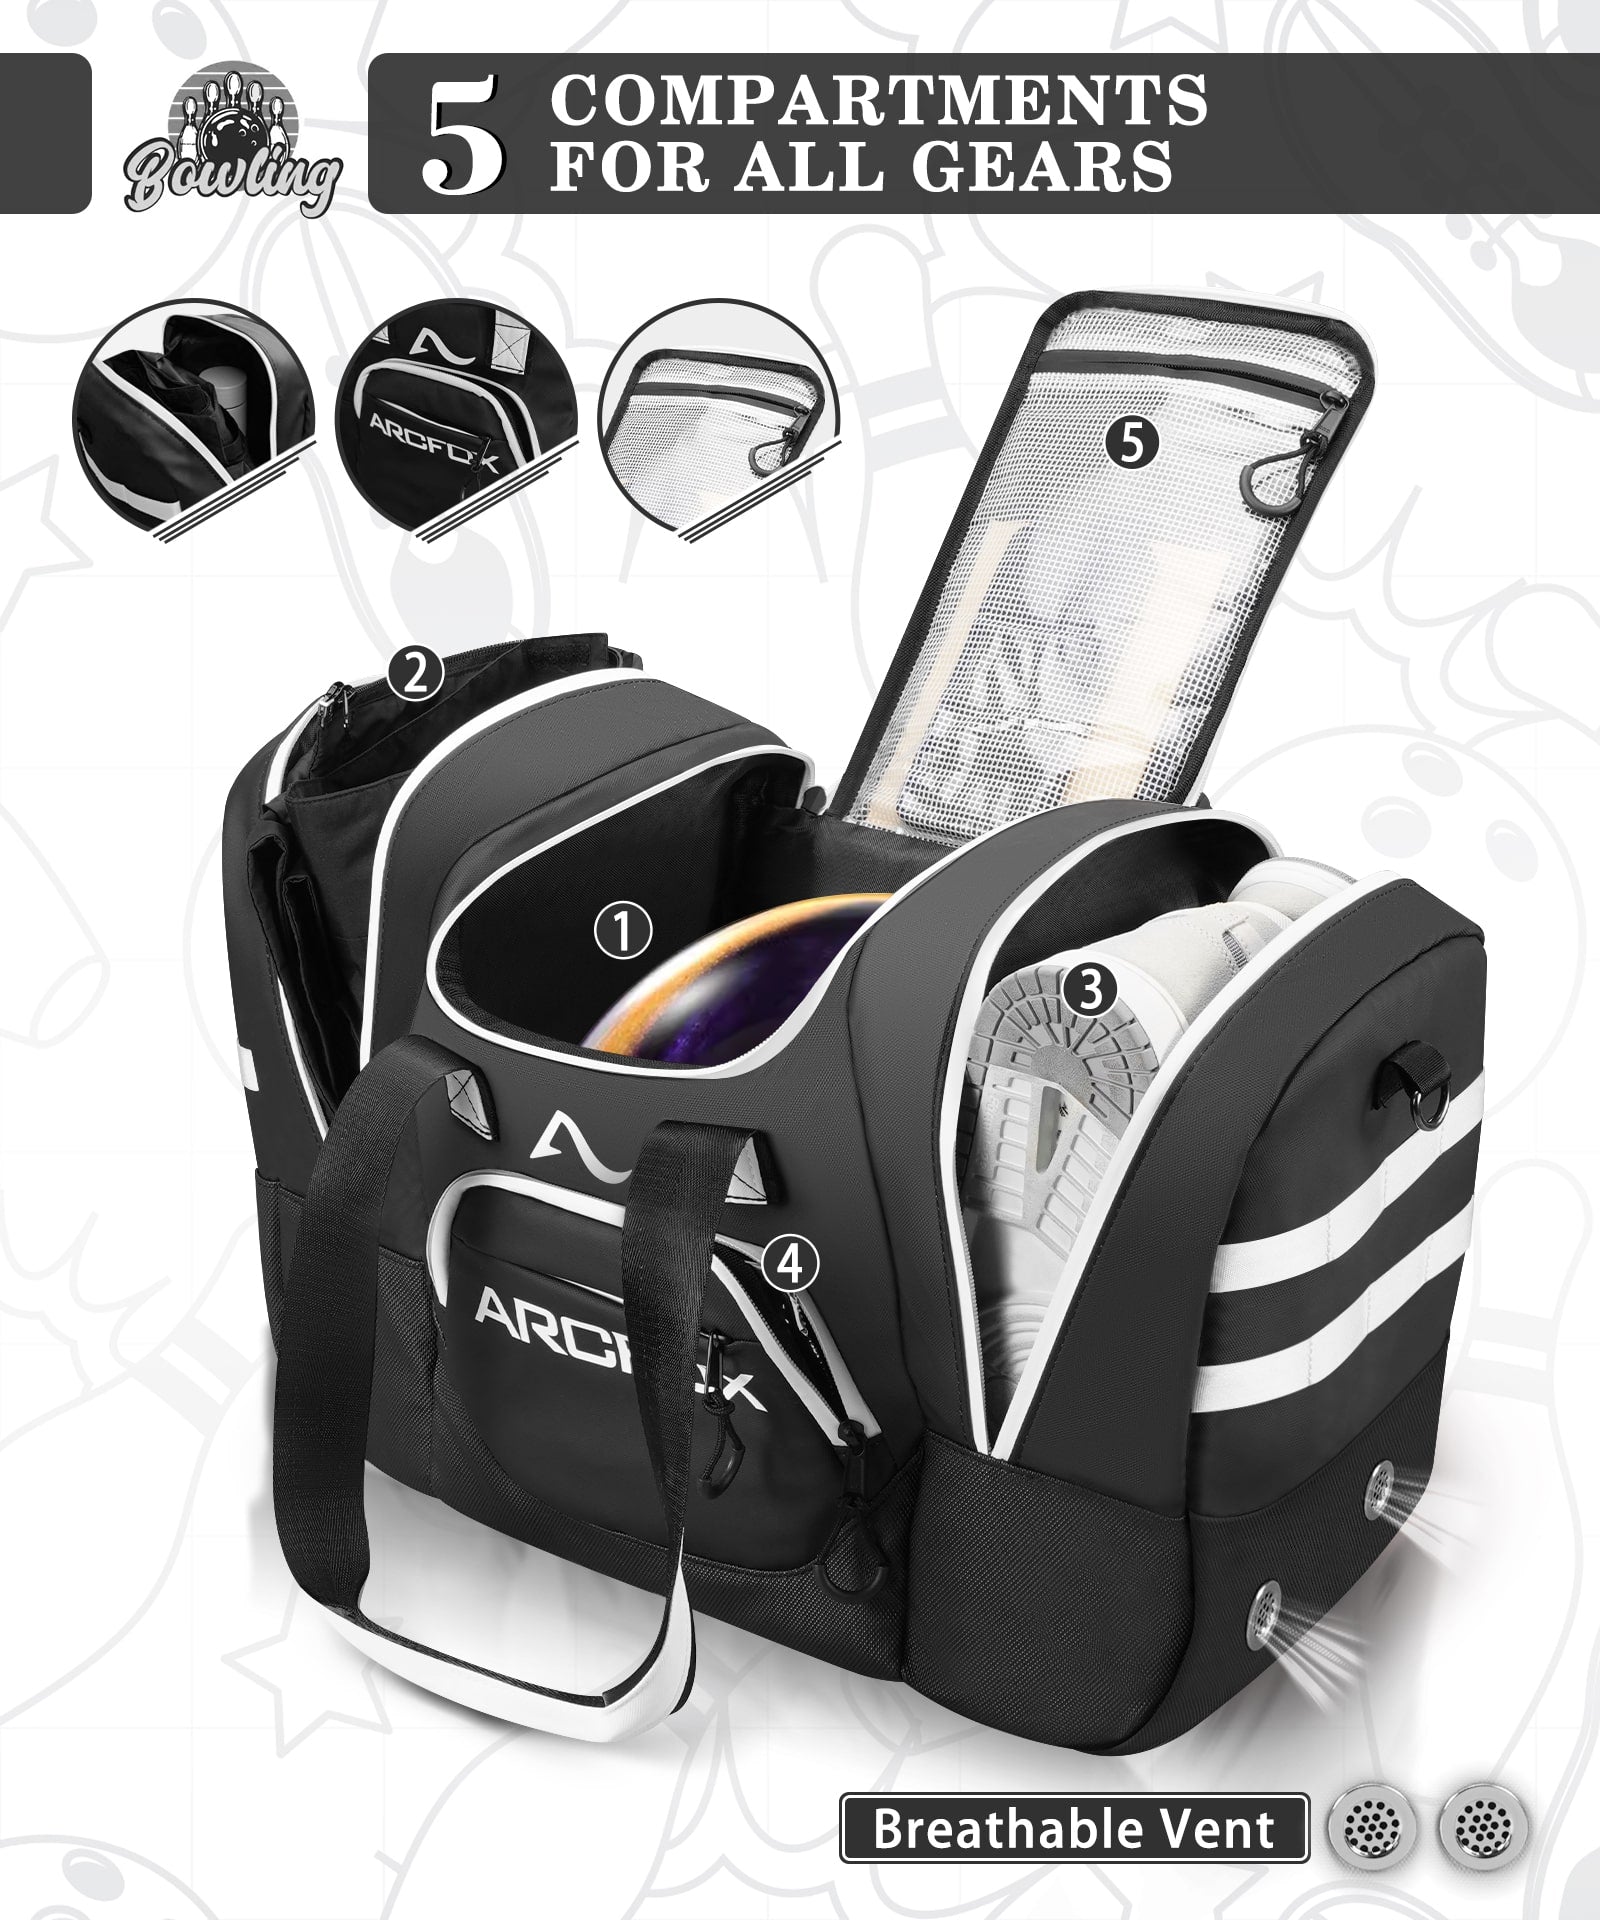 ARCFOX Bowling Bag for Single Ball with Reinforced Ball Holder Straps